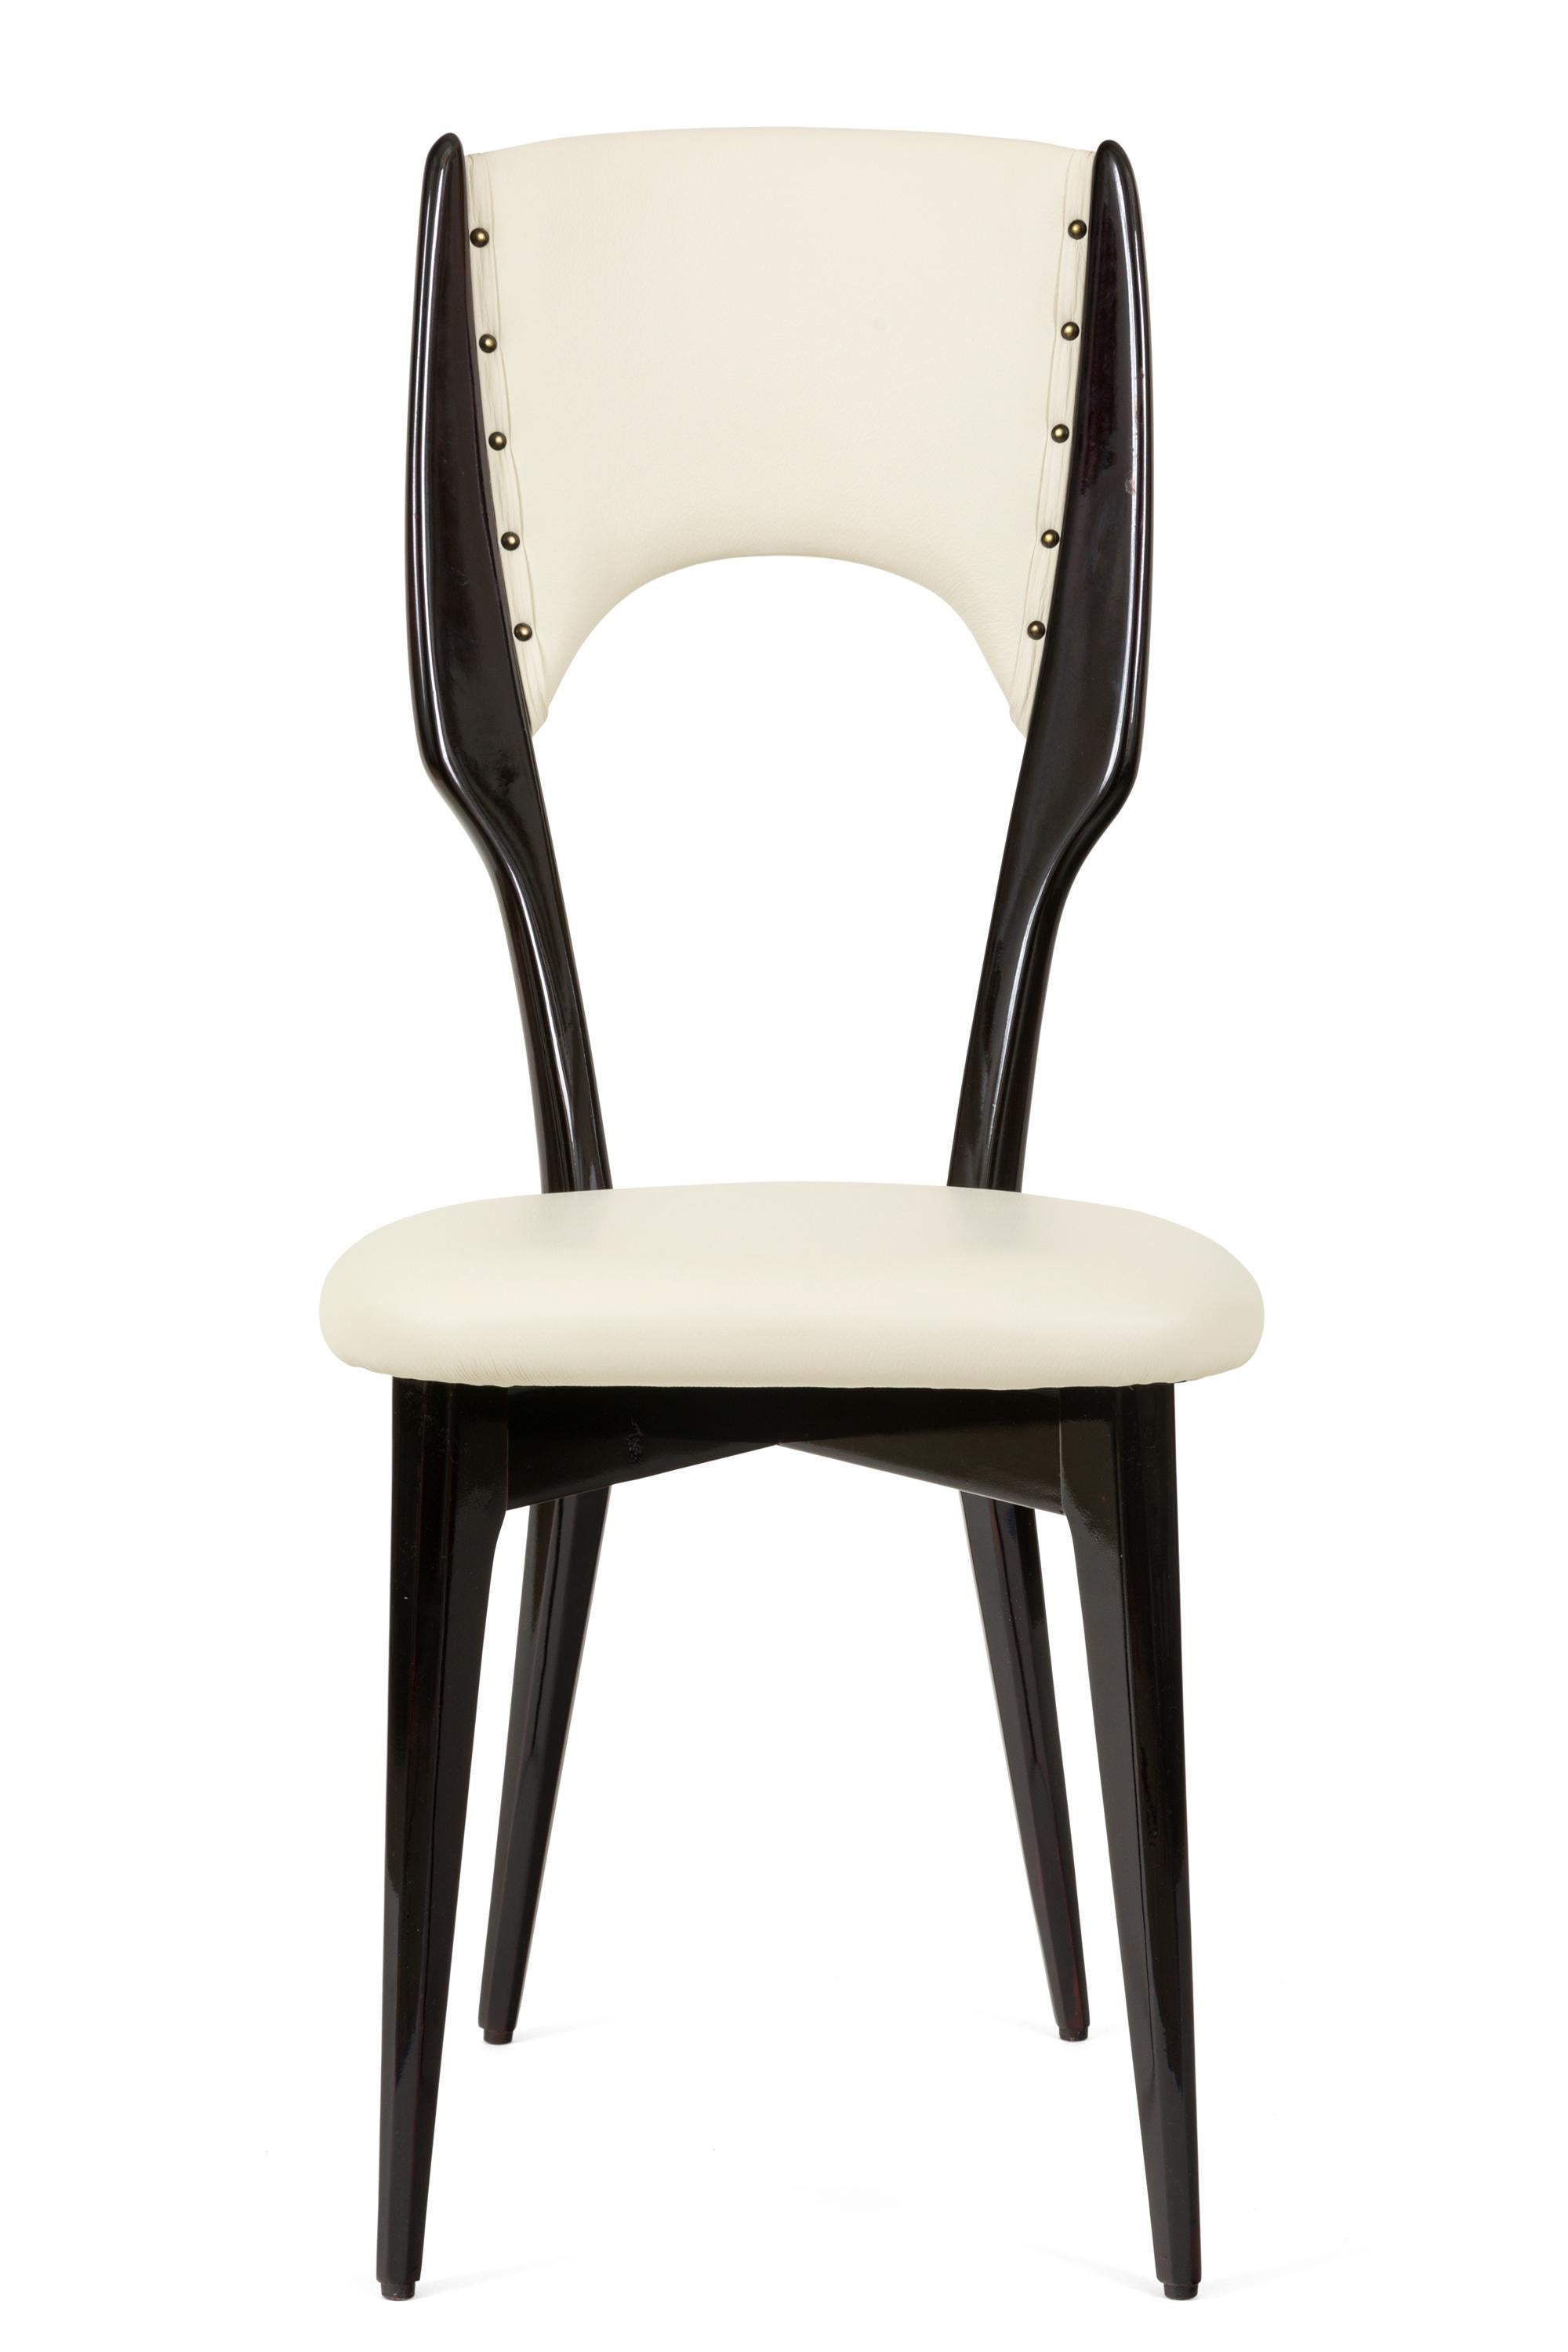 Italian Mid-Century Black Lacquer & White Leather Dining Chairs, Italy 1950s